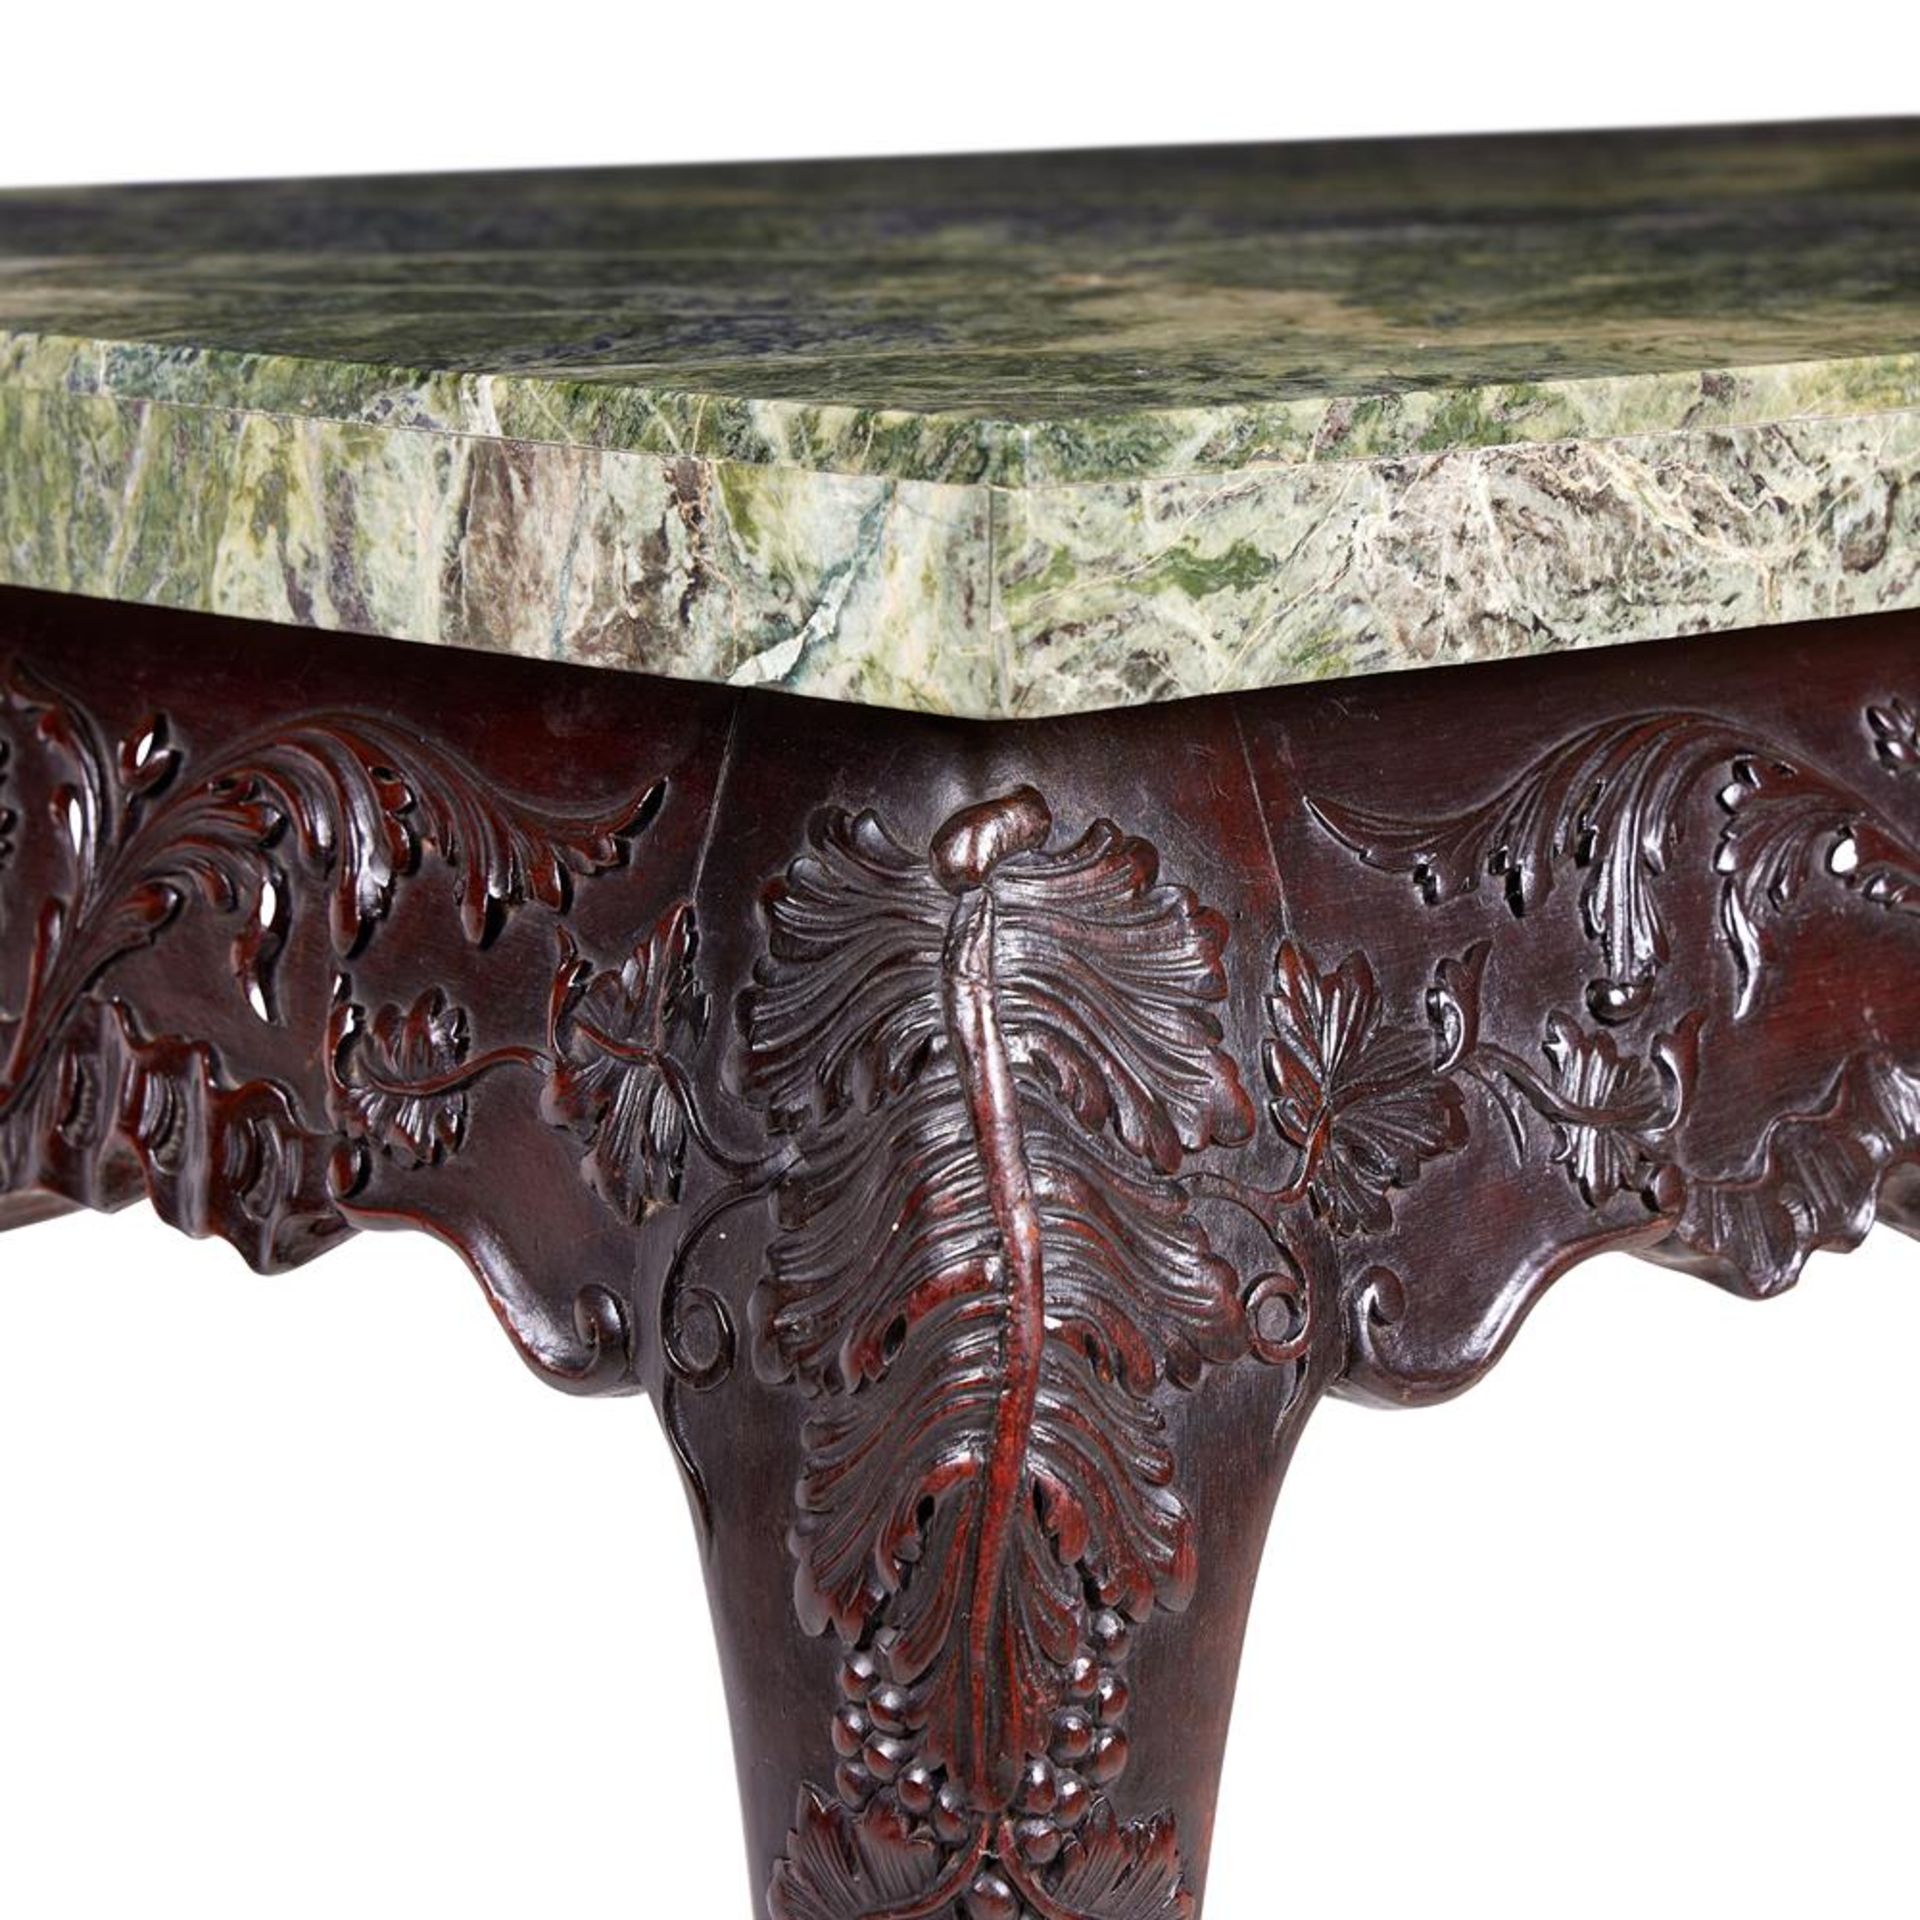 A CARVED MAHOGANY CONSOLE TABLE IN THE GEORGE II IRISH STYLE, LATE 19TH CENTURY - Image 5 of 5